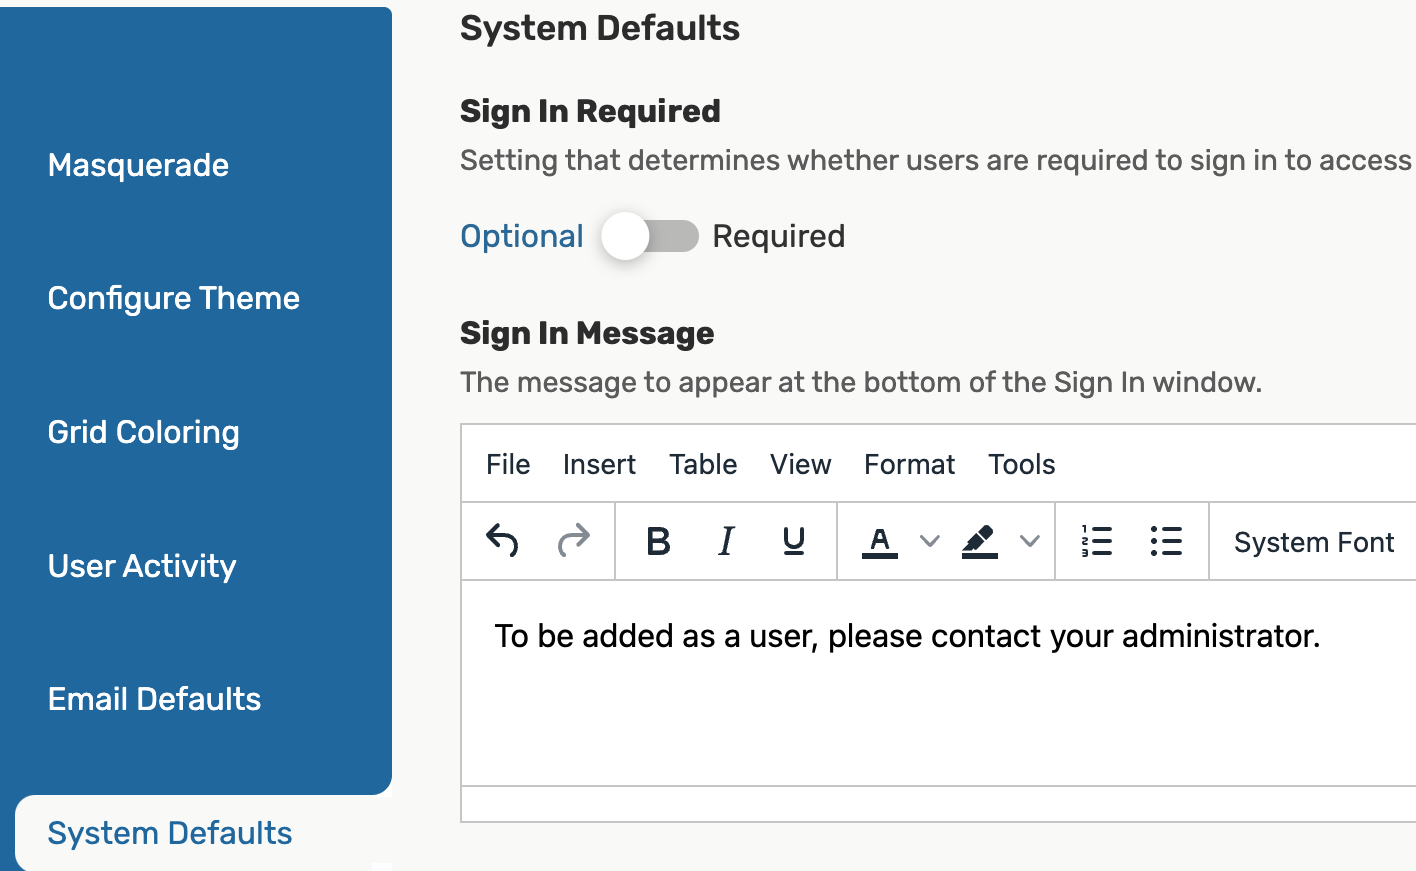 The Sign In Message editor in System Defaults